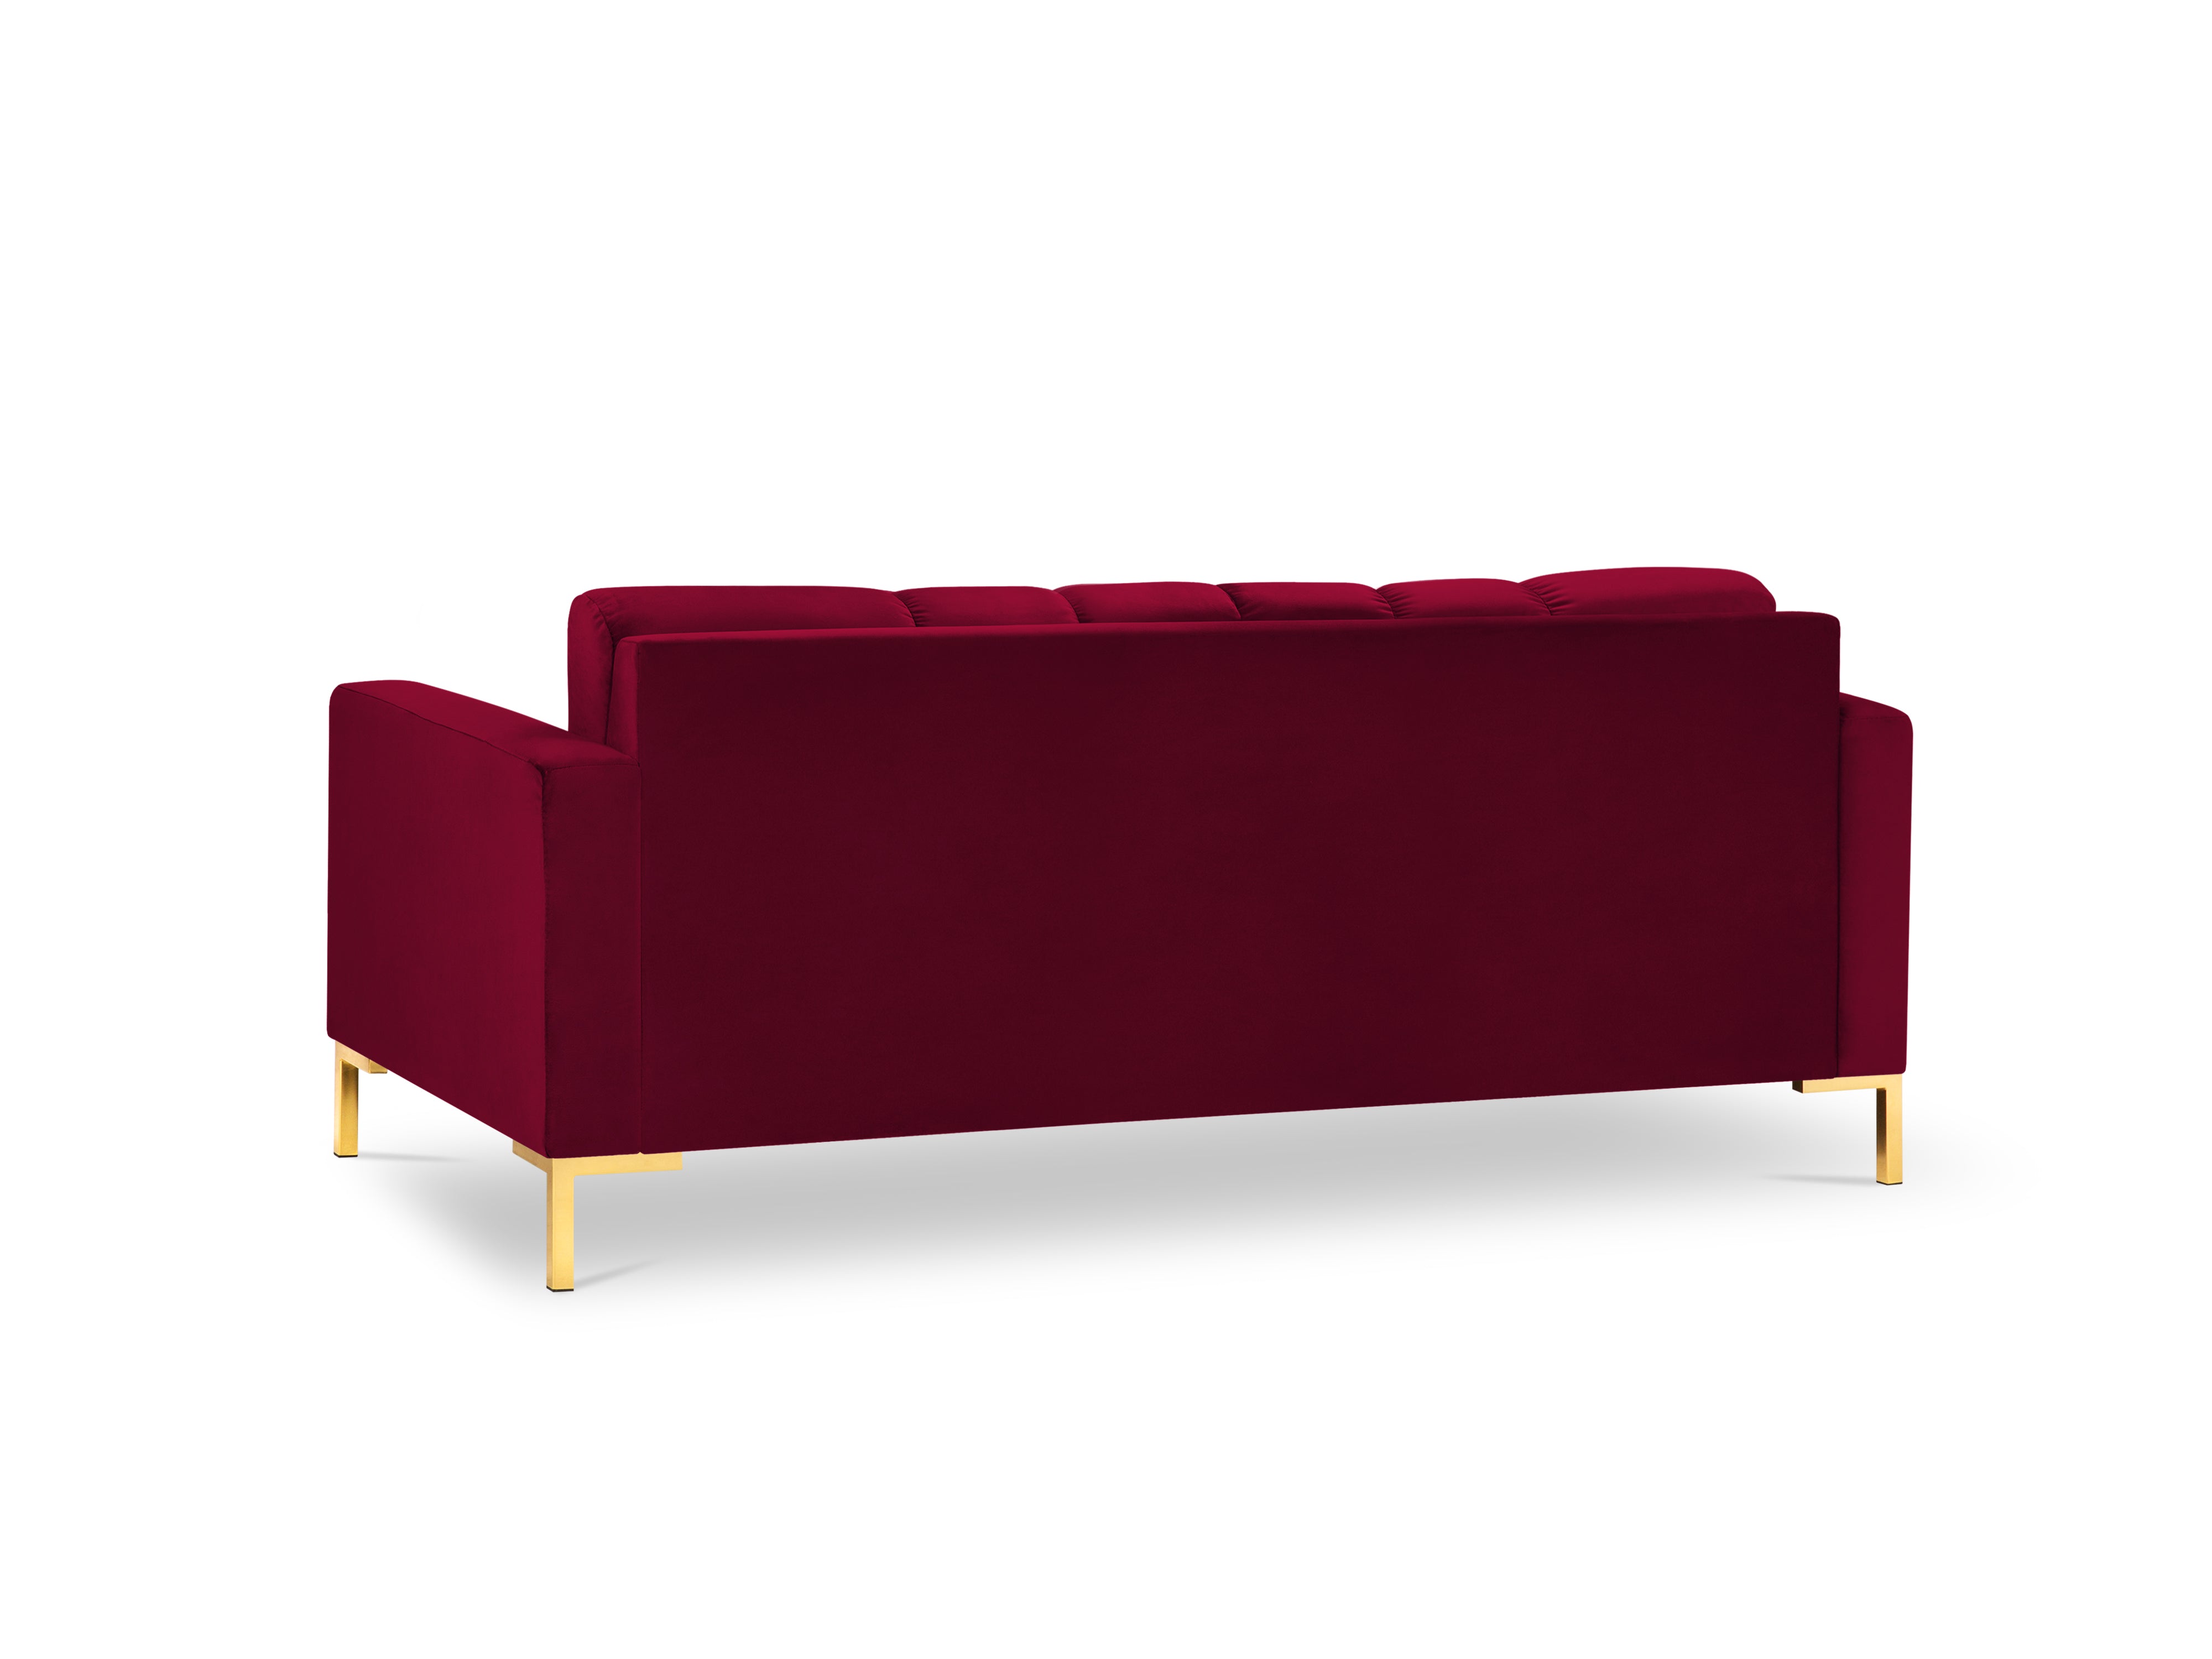 Red sofa with a golden base